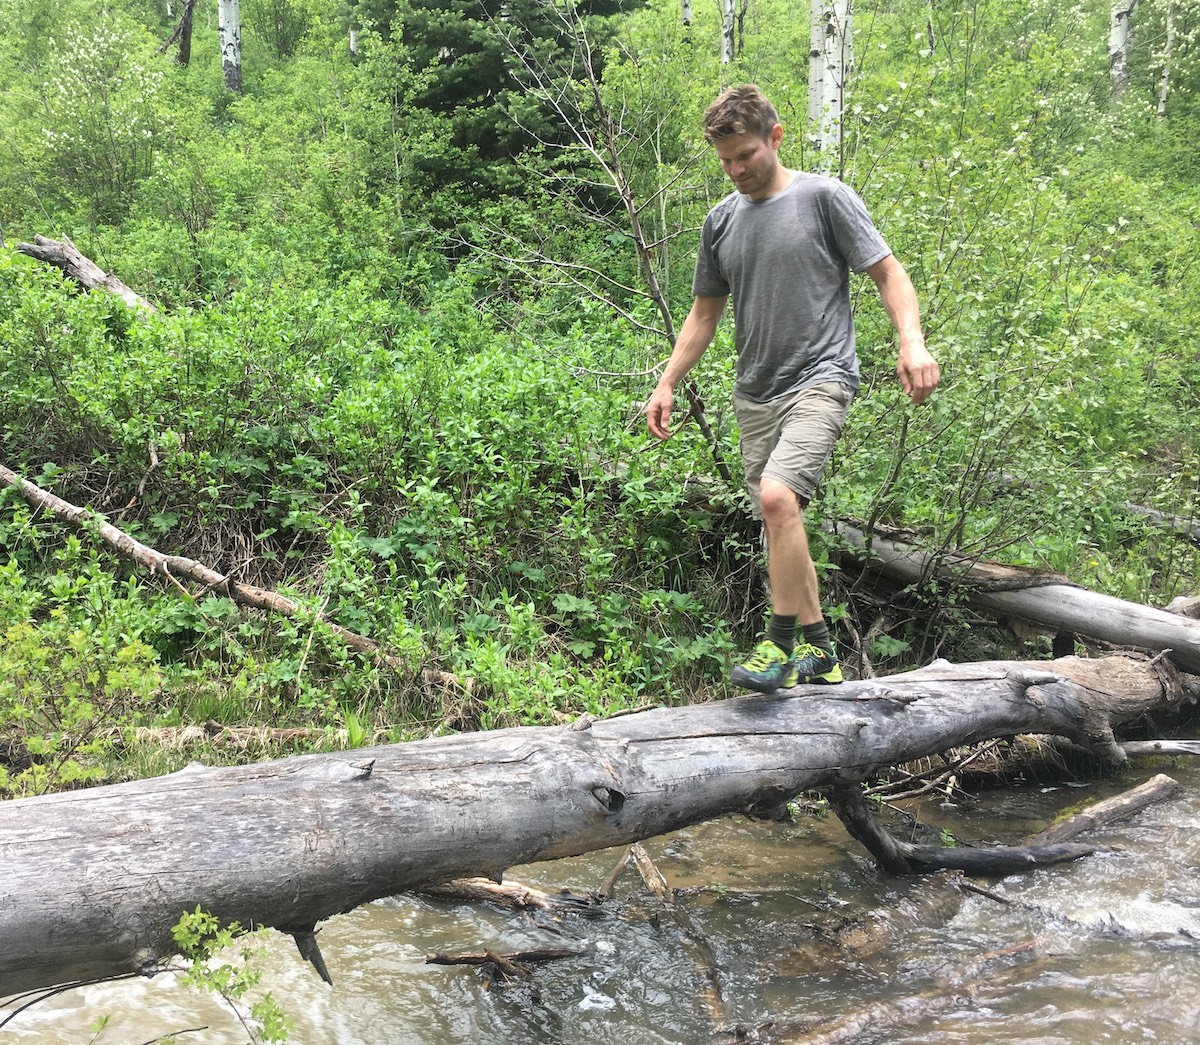 The author appreciating the sticky rubber of the Salewa Wildfire Edge approach shoes during a log crossing on a backpack trip in western Colorado last June. [Photo] Mandi Franz